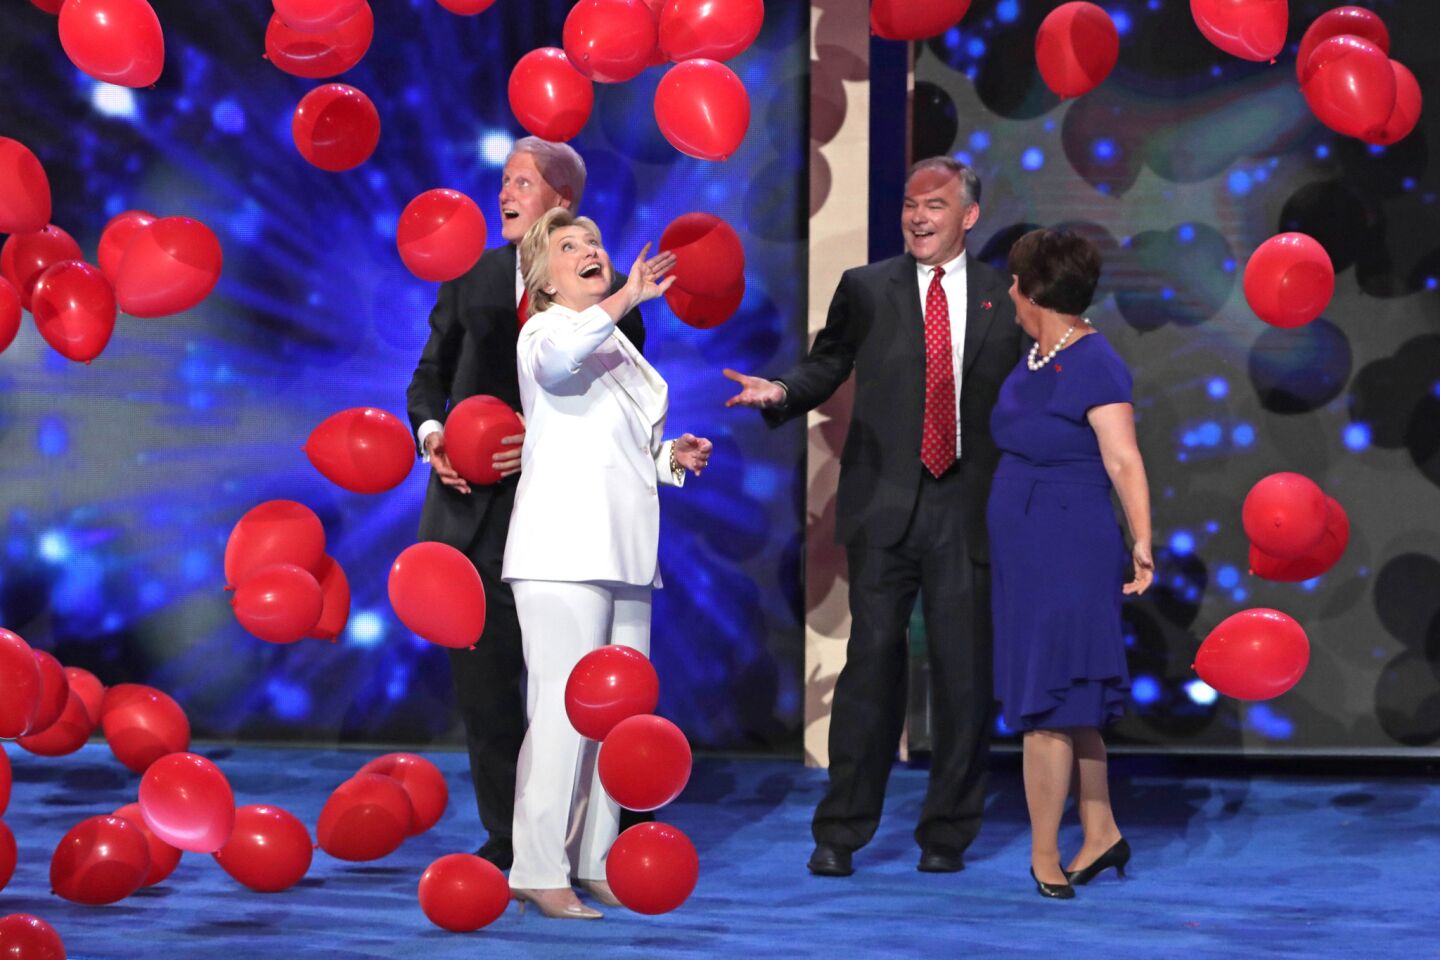 Democratic presidential candidate Hillary Clinton stands with her husband former President Bill Clinton on stage with Vice President nominee Tim Kaine and his wife Anne Holton at the end of the fourth day of the Democratic National Convention.